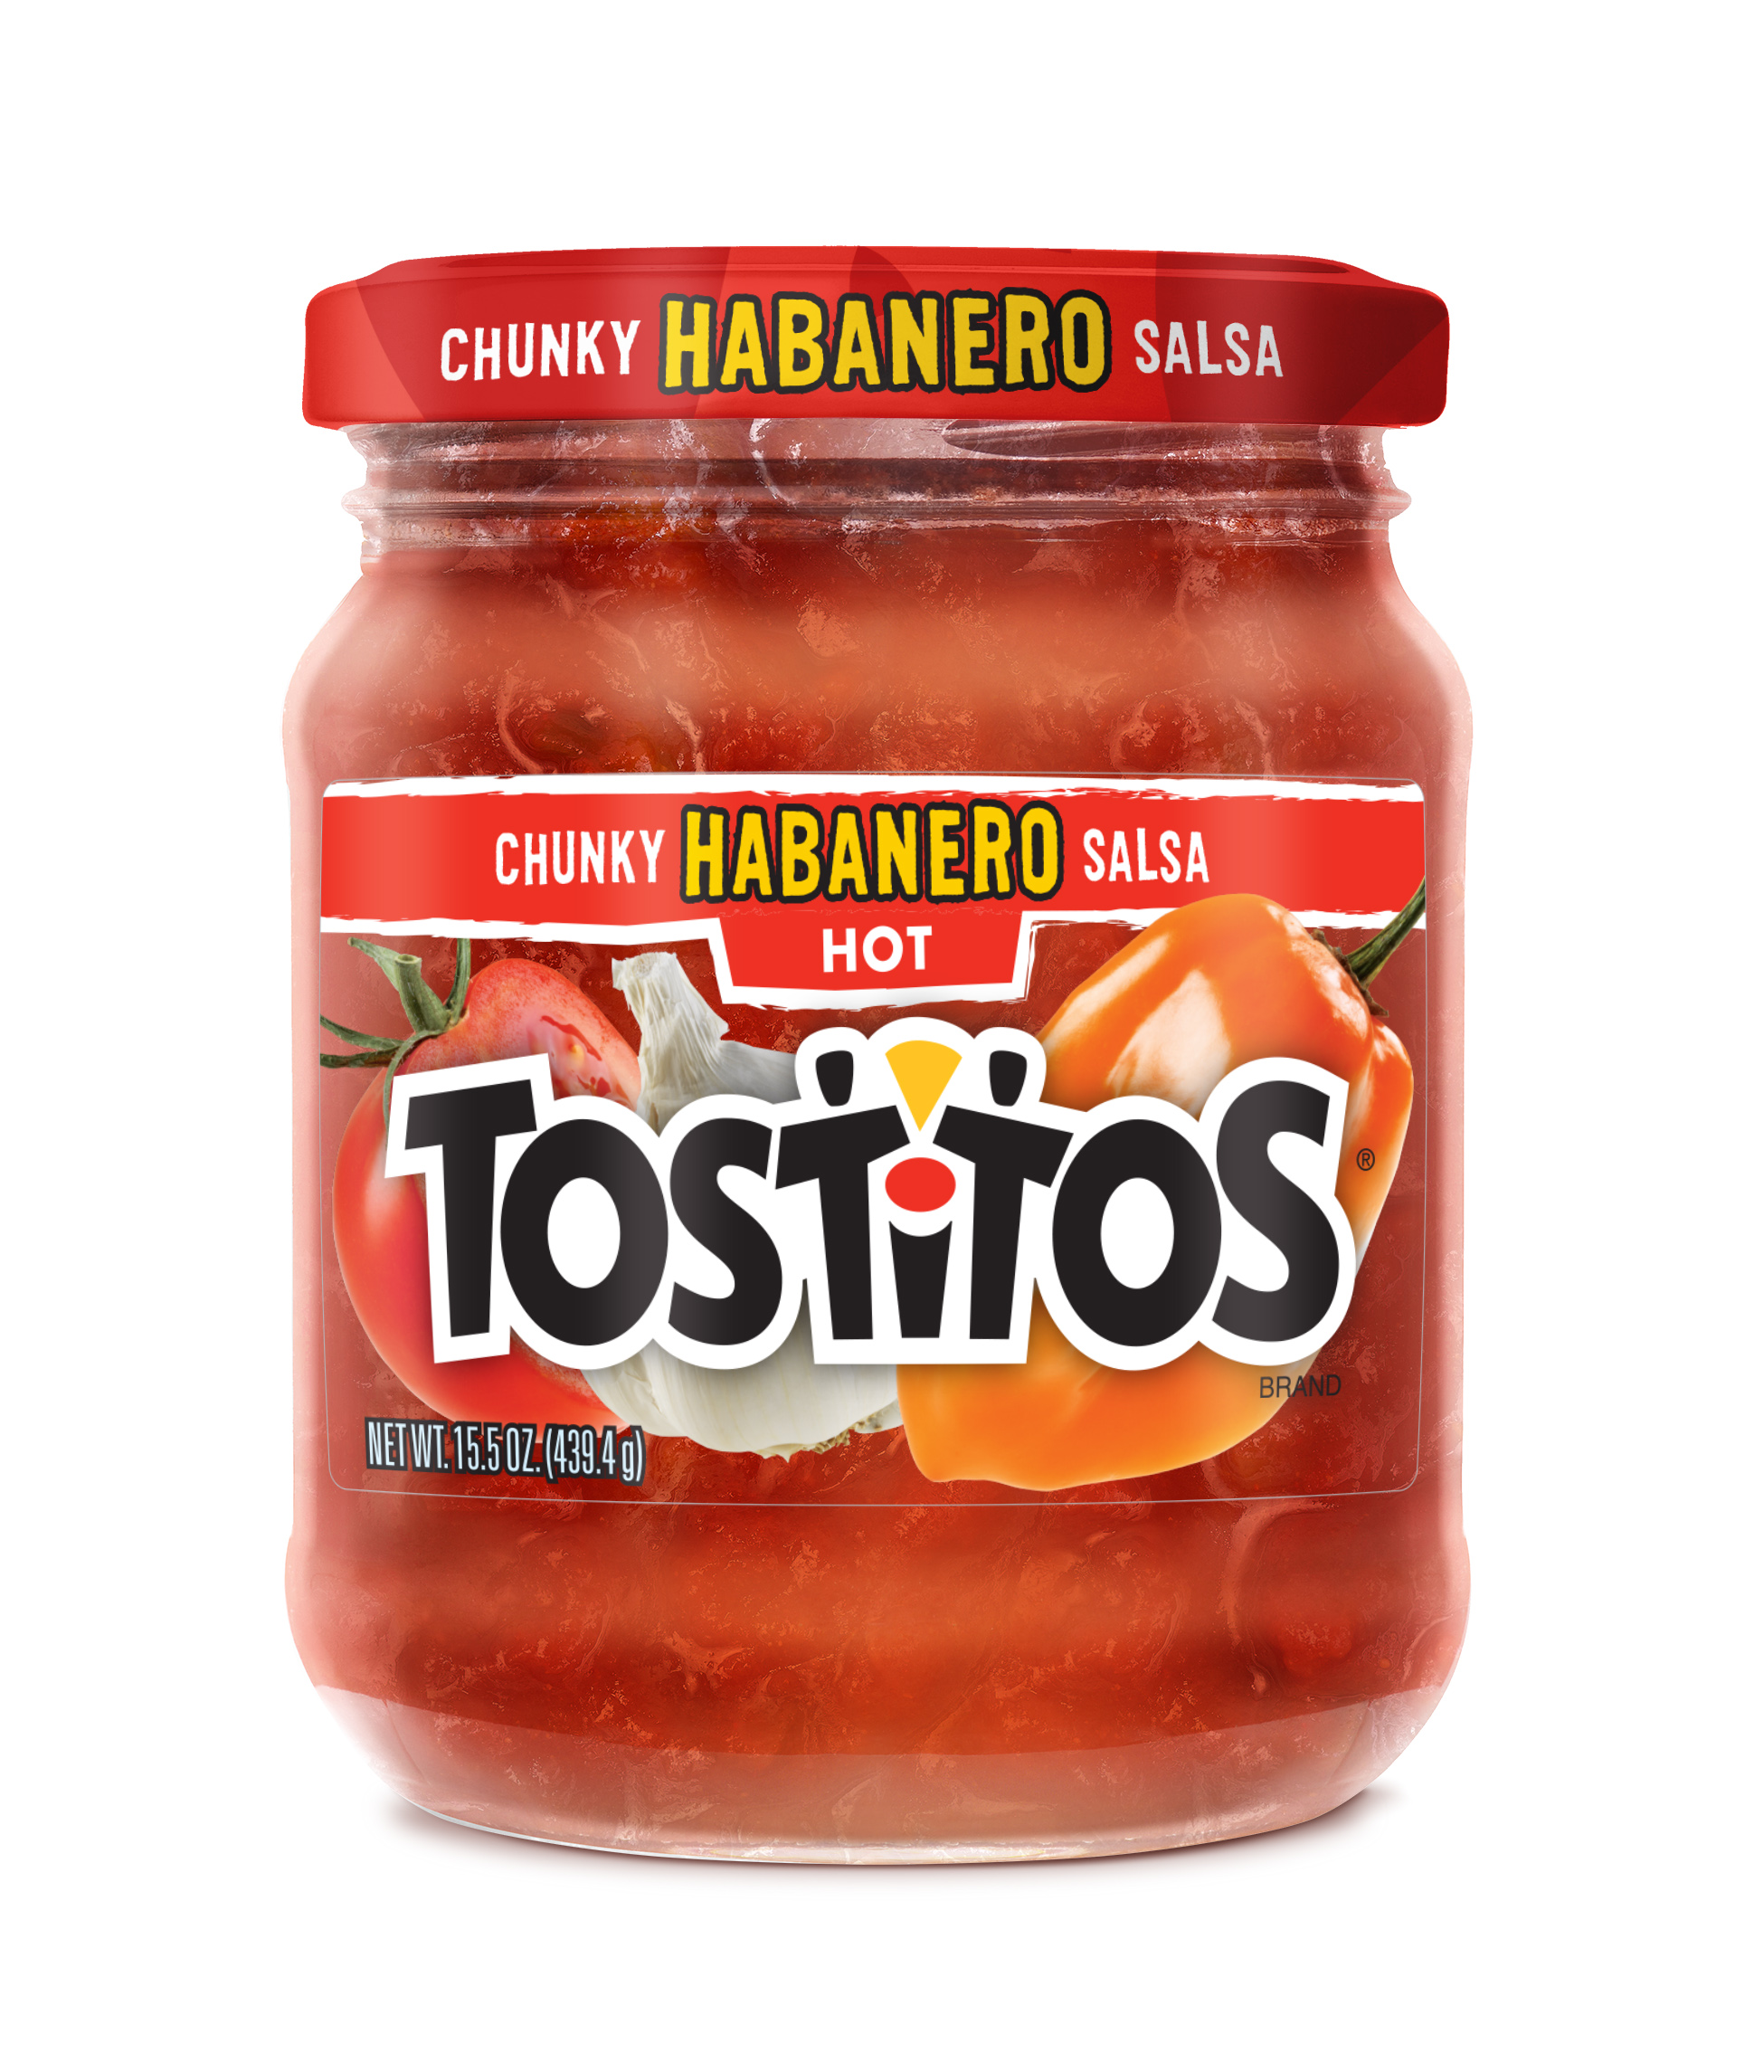 TOSTITOS Habanero Salsa will really spice things up at your next get-together. Ripe tomatoes, onions and jalapeños are combined with spicy habanero peppers to bring some serious heat to this salsa—now that's spicy.